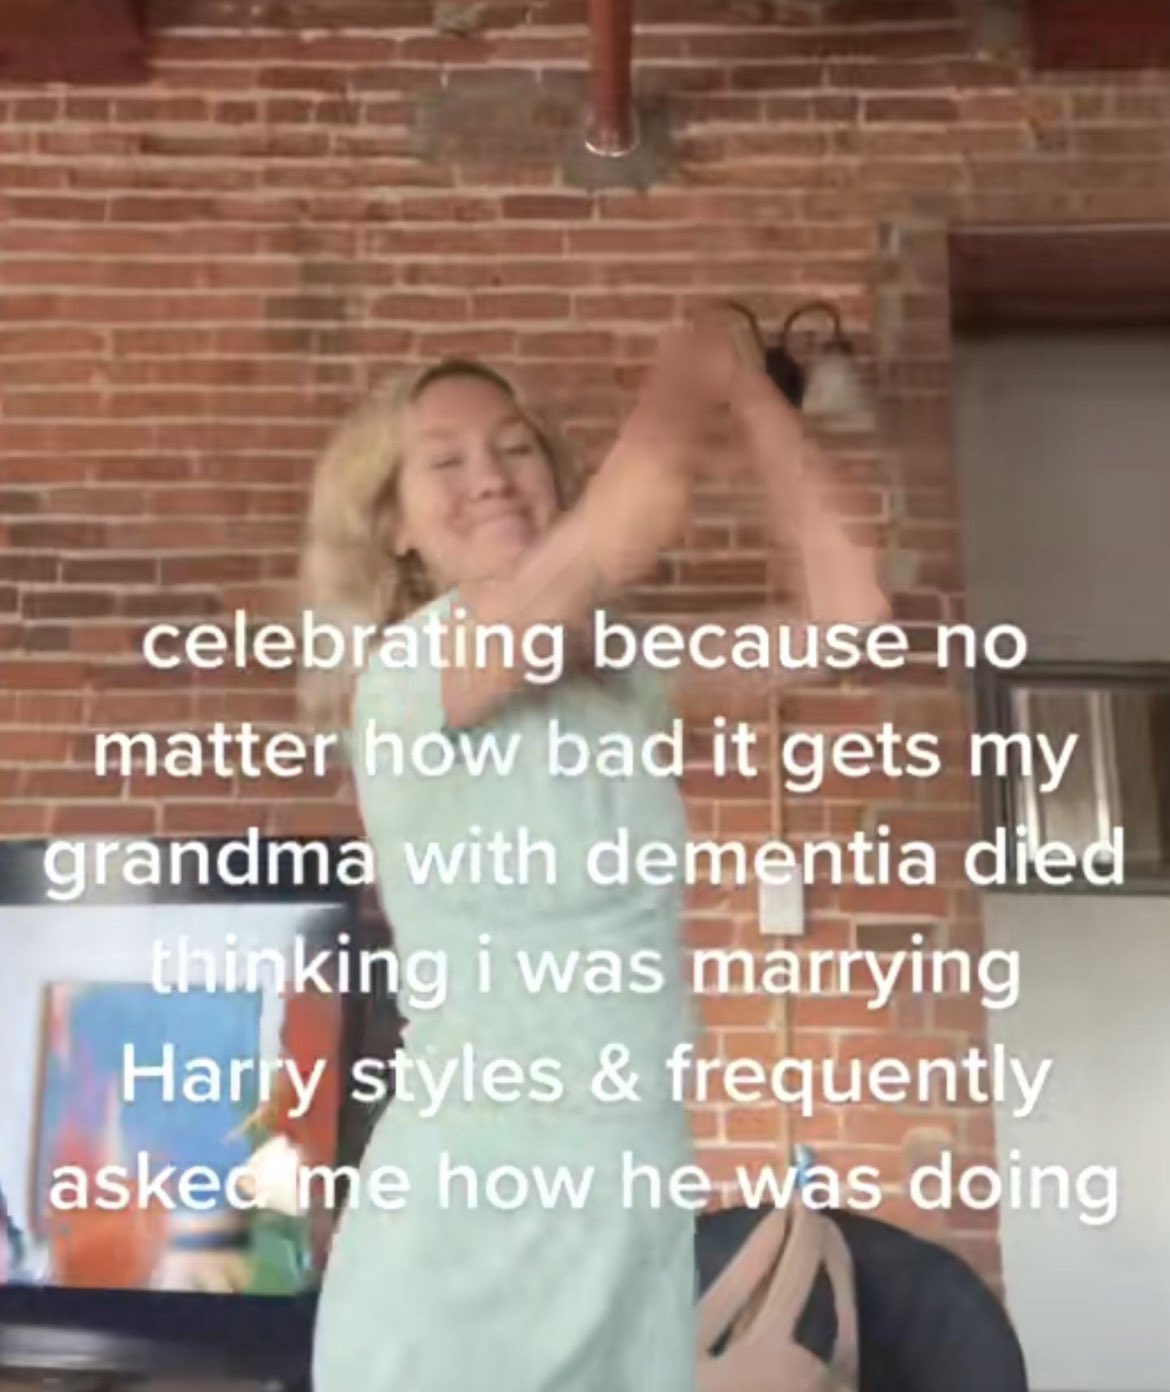 wild tiktok screenshots - end of love - celebrating because no matter how bad it gets my grandma with dementia died thinking i was marrying Harry styles & frequently asked me how he was doing